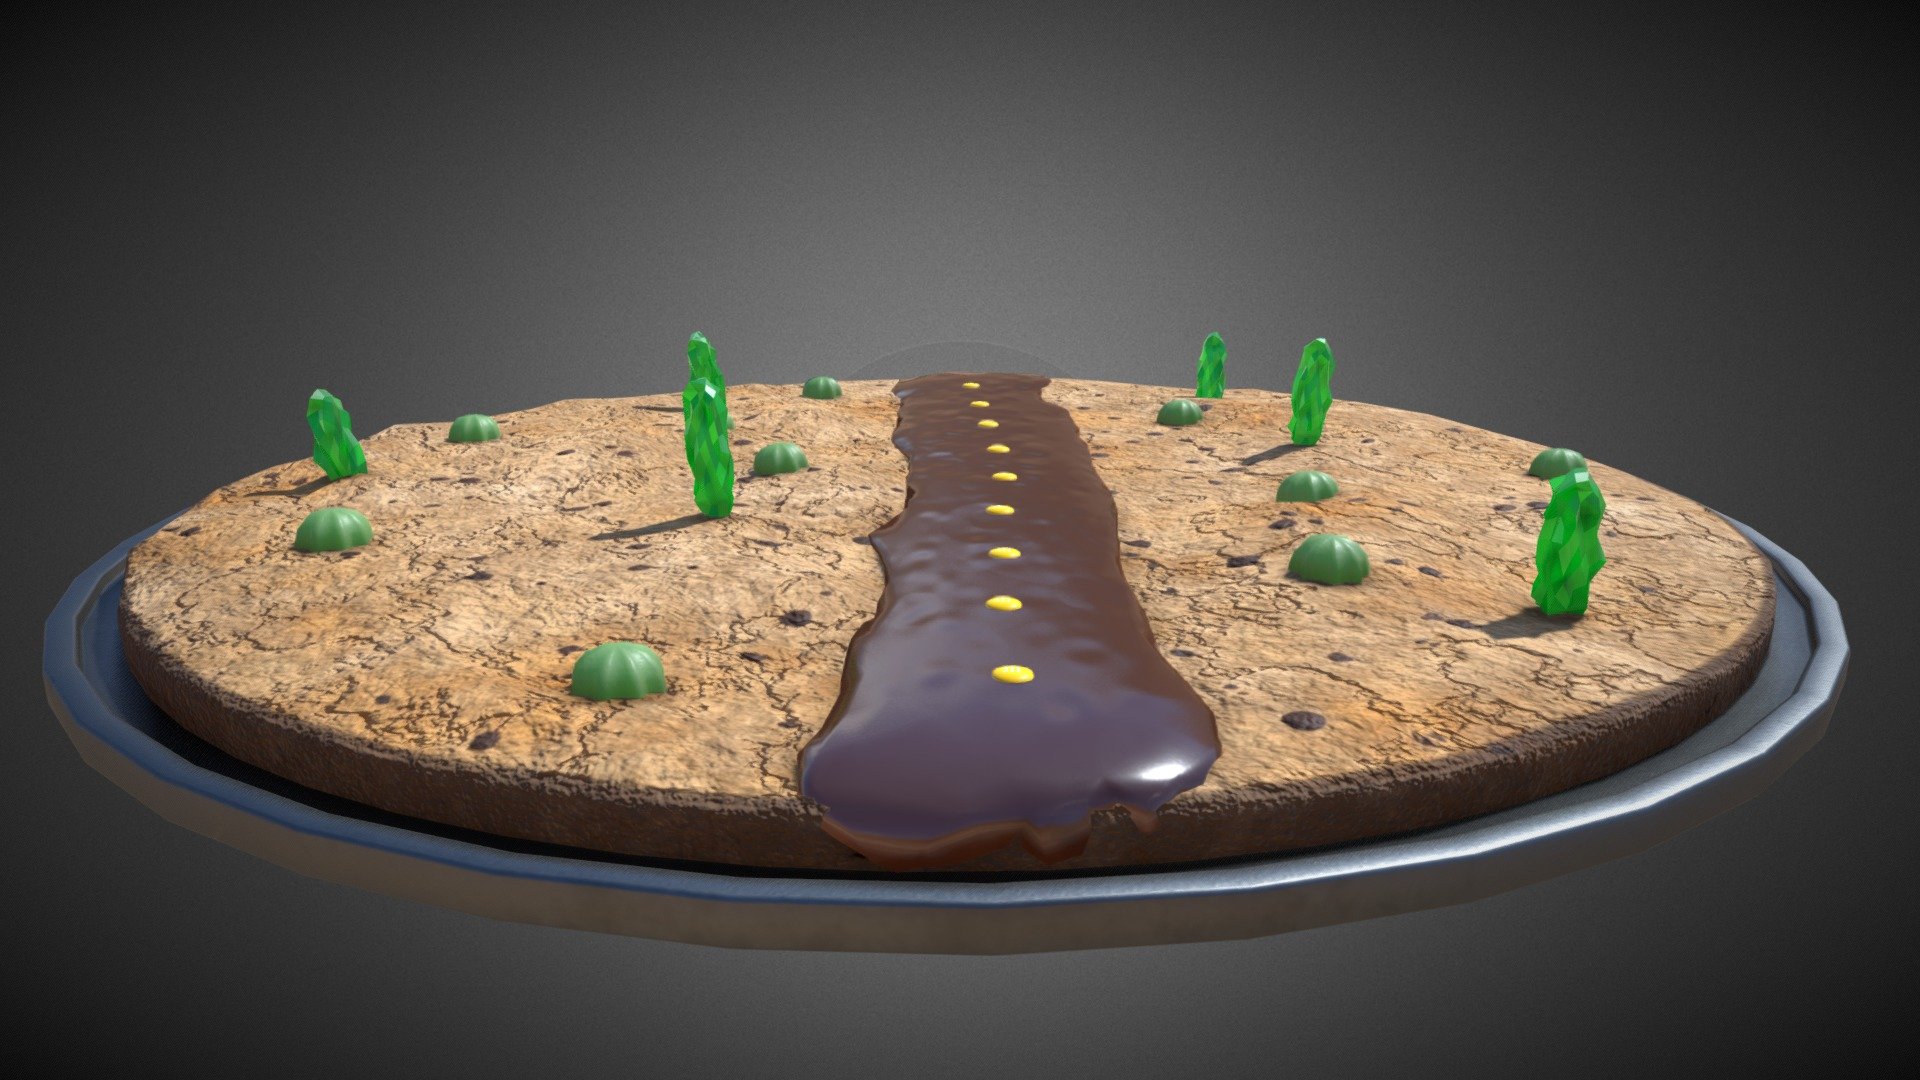 This is my entry for the #LowPolyDessertChallenge. The contest rules said to make sure to use two Ses in the hashtag because “LowPolyDesertChallenge” would be something else entirely, but I disagreed, so I made a cookie cake that was also a desert, complete with a chocolate syrup road, and icing and rock candy cactuses. :)

Made with blender and substance painter 3d model